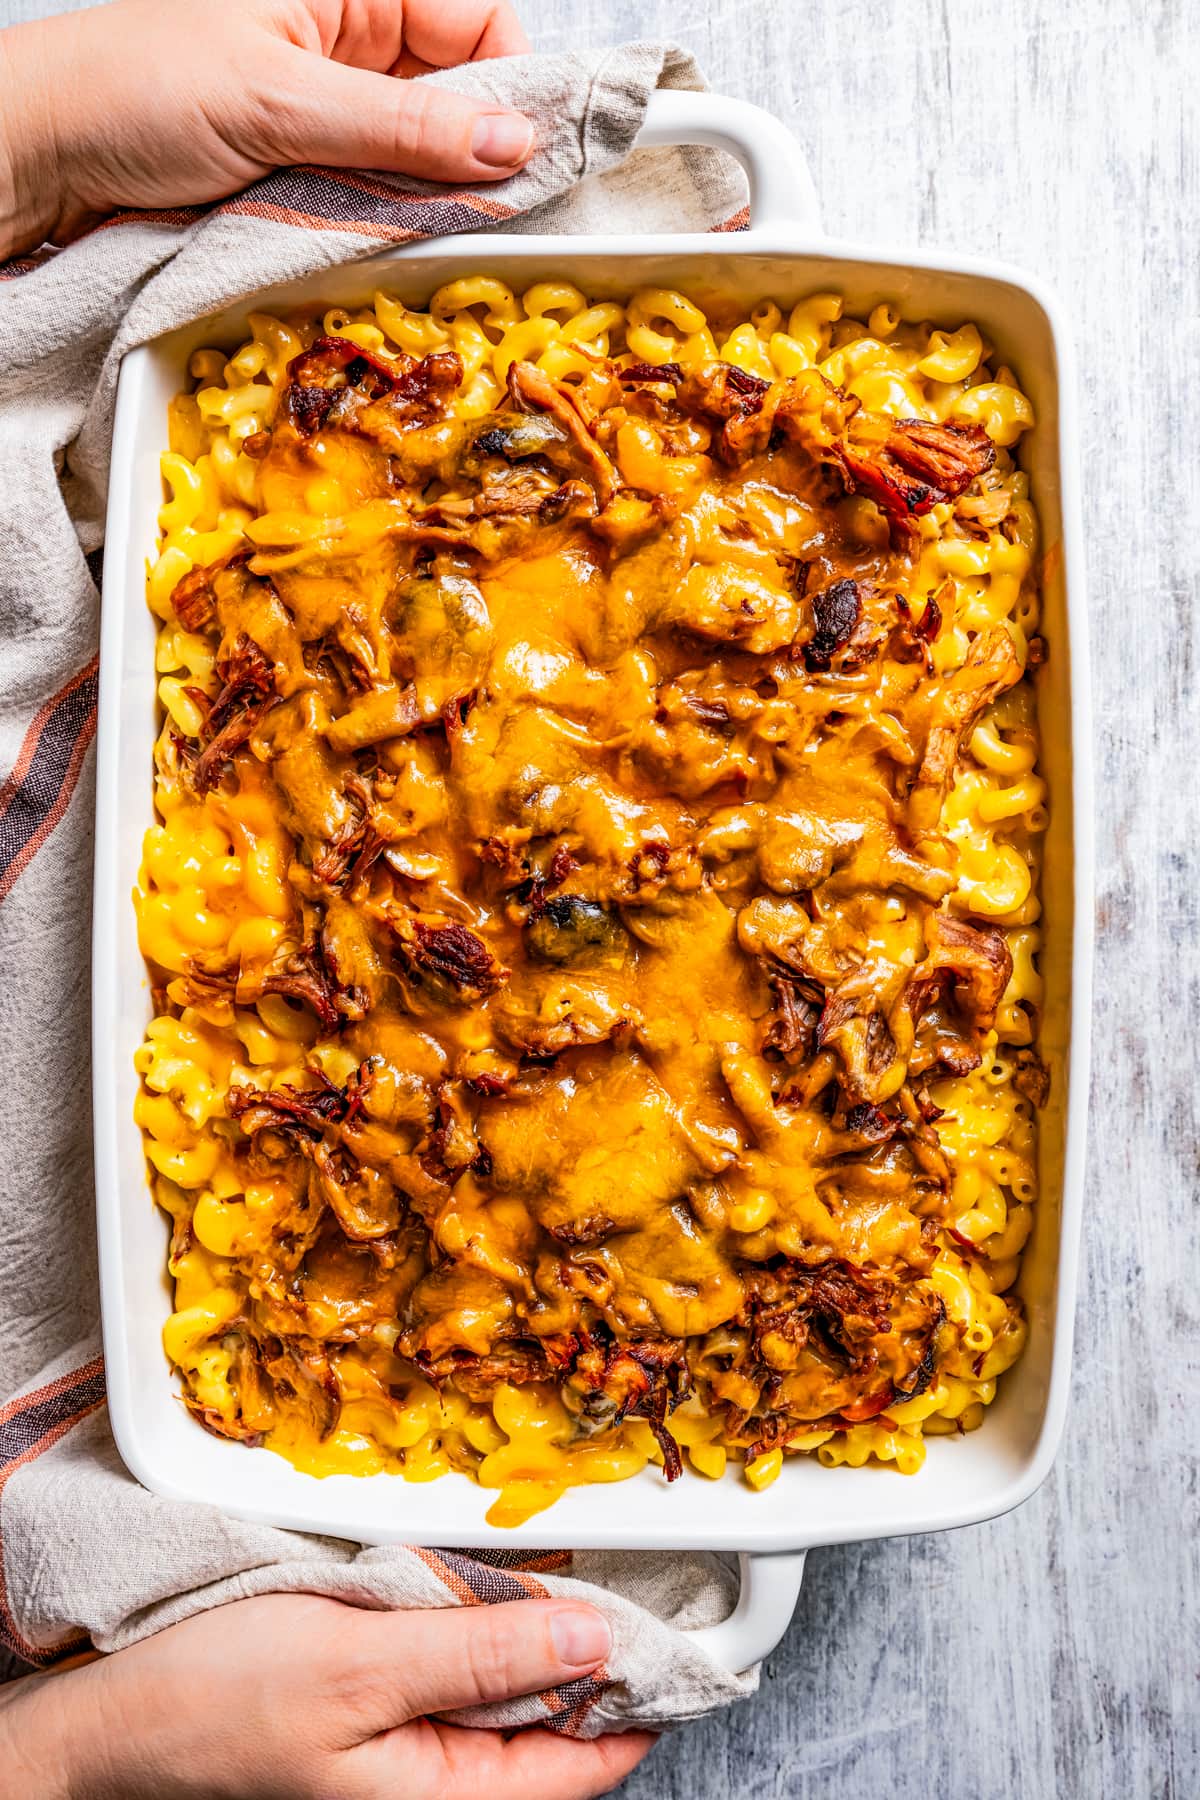 Two hands holding either side of a casserole dish full of pulled pork mac and cheese.